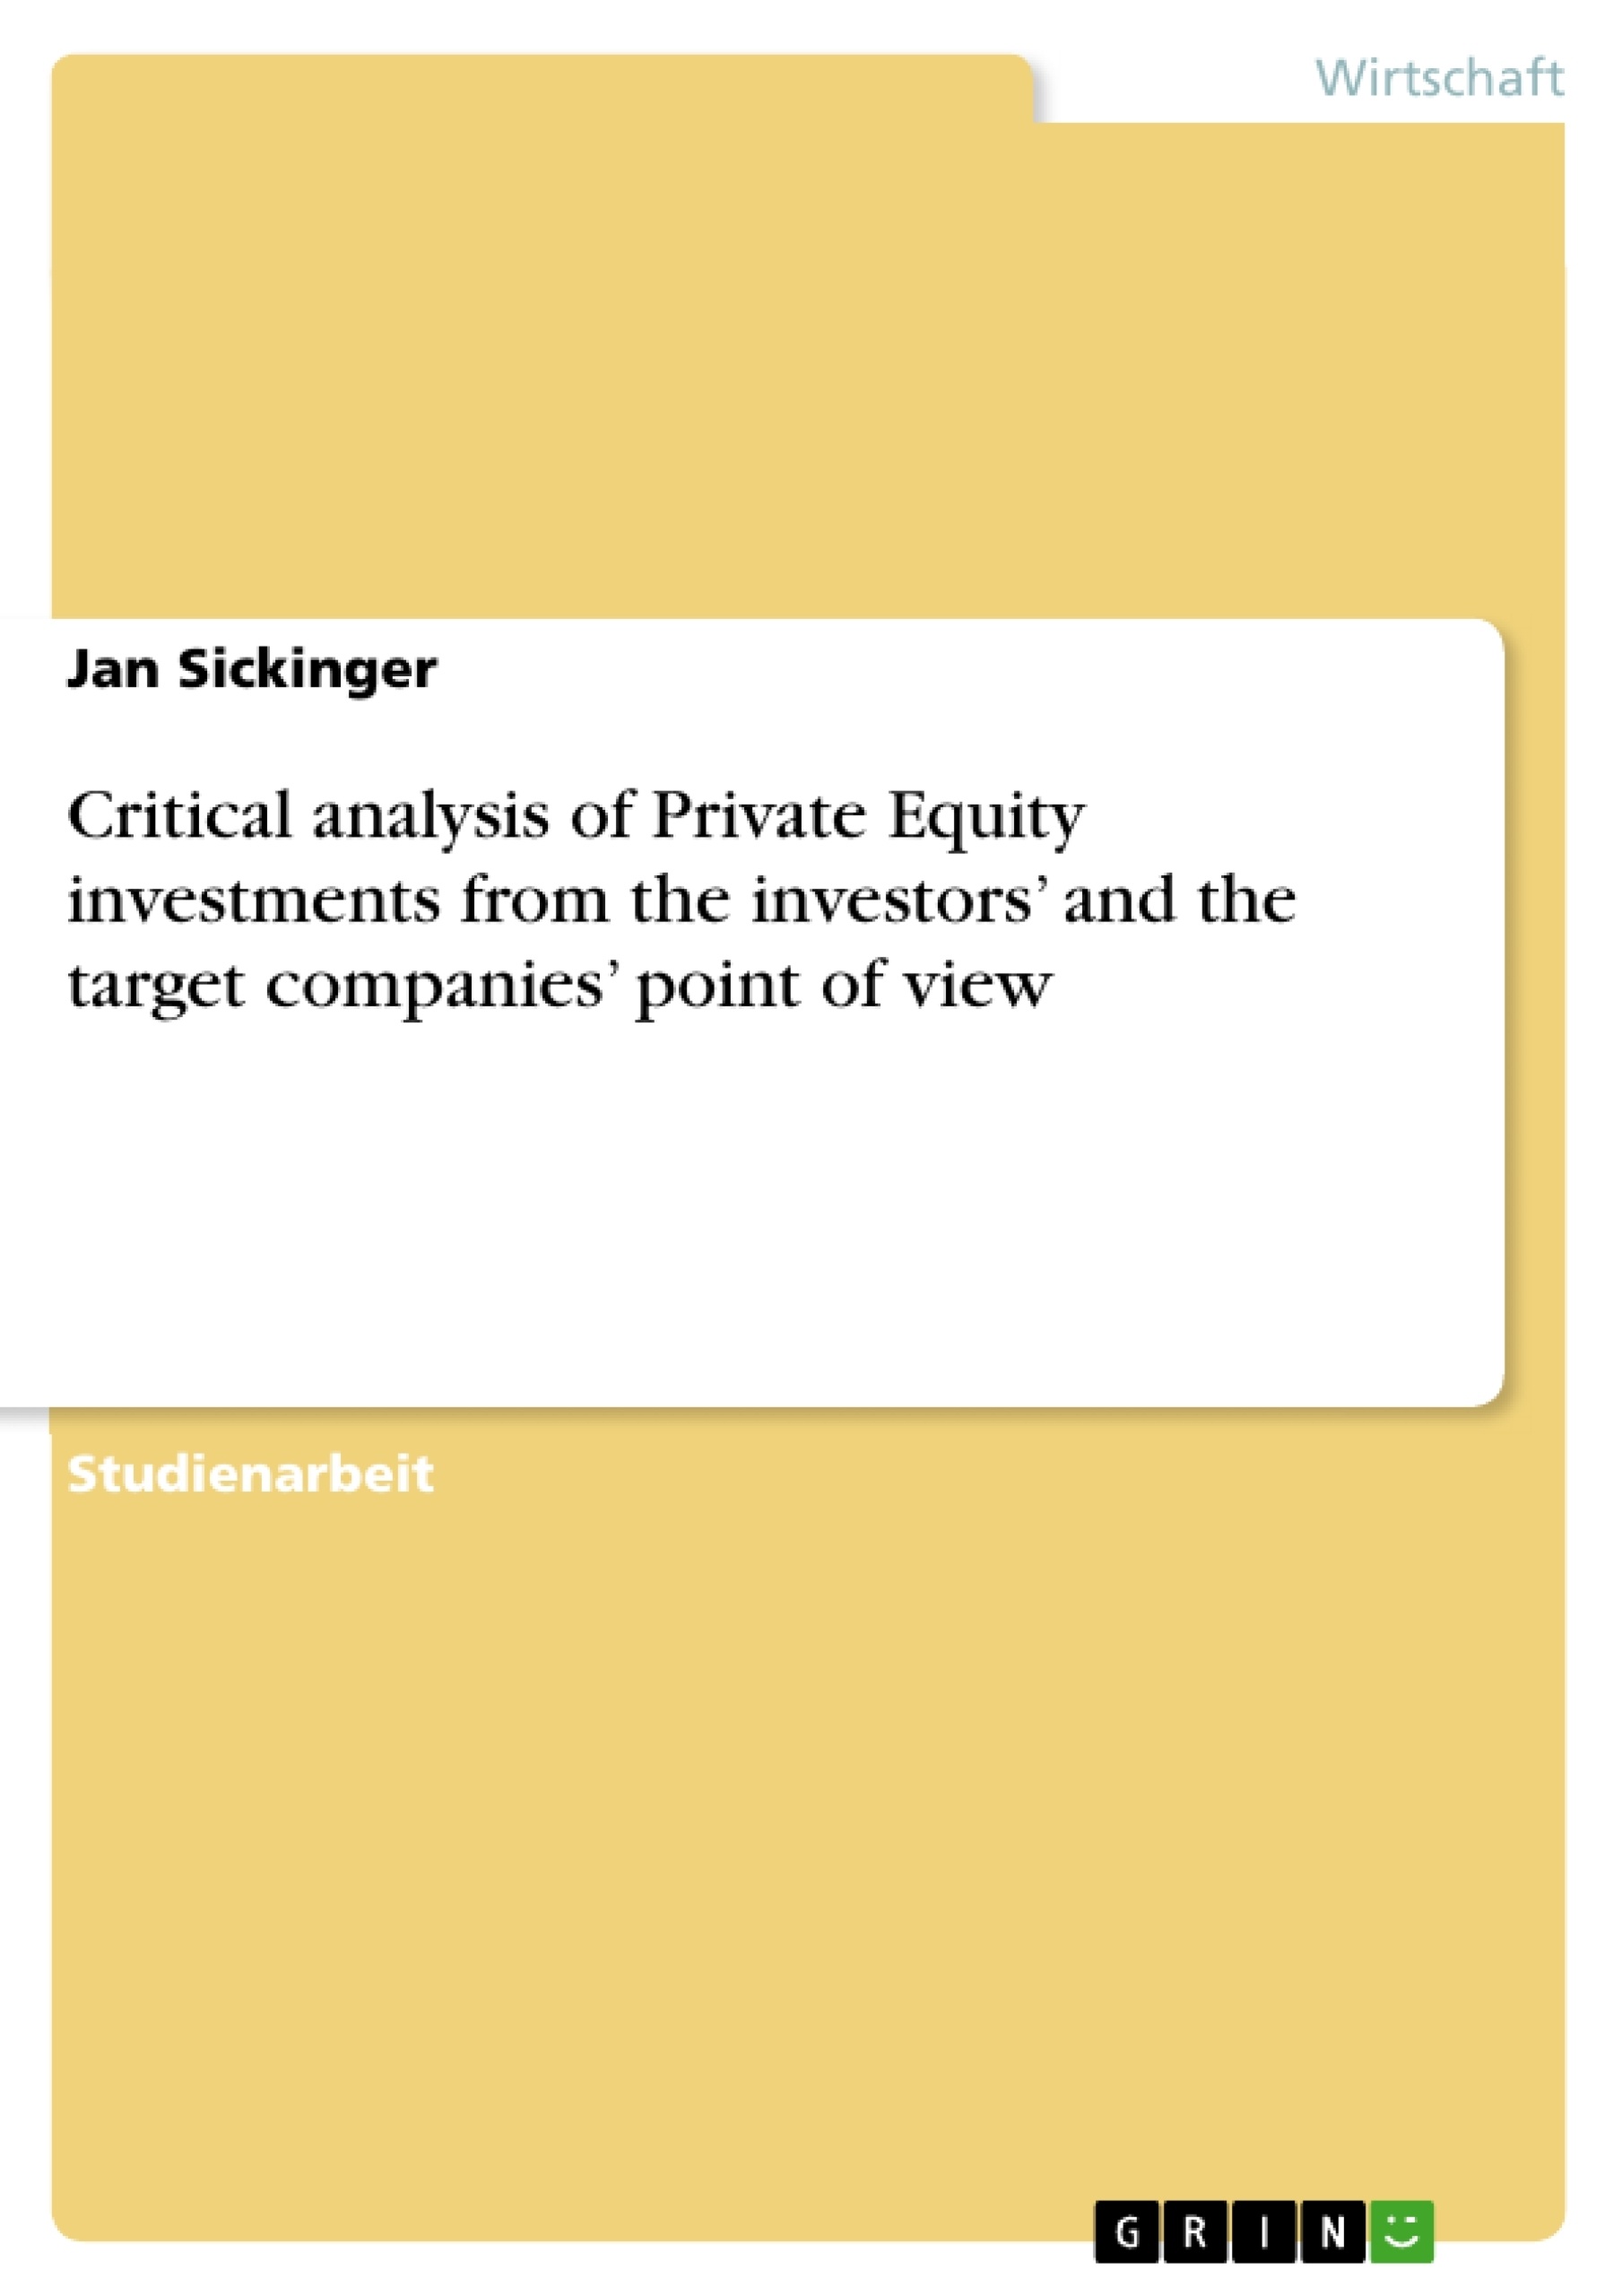 Titel: Critical analysis of Private Equity investments from the investors’ and the target companies’ point of view